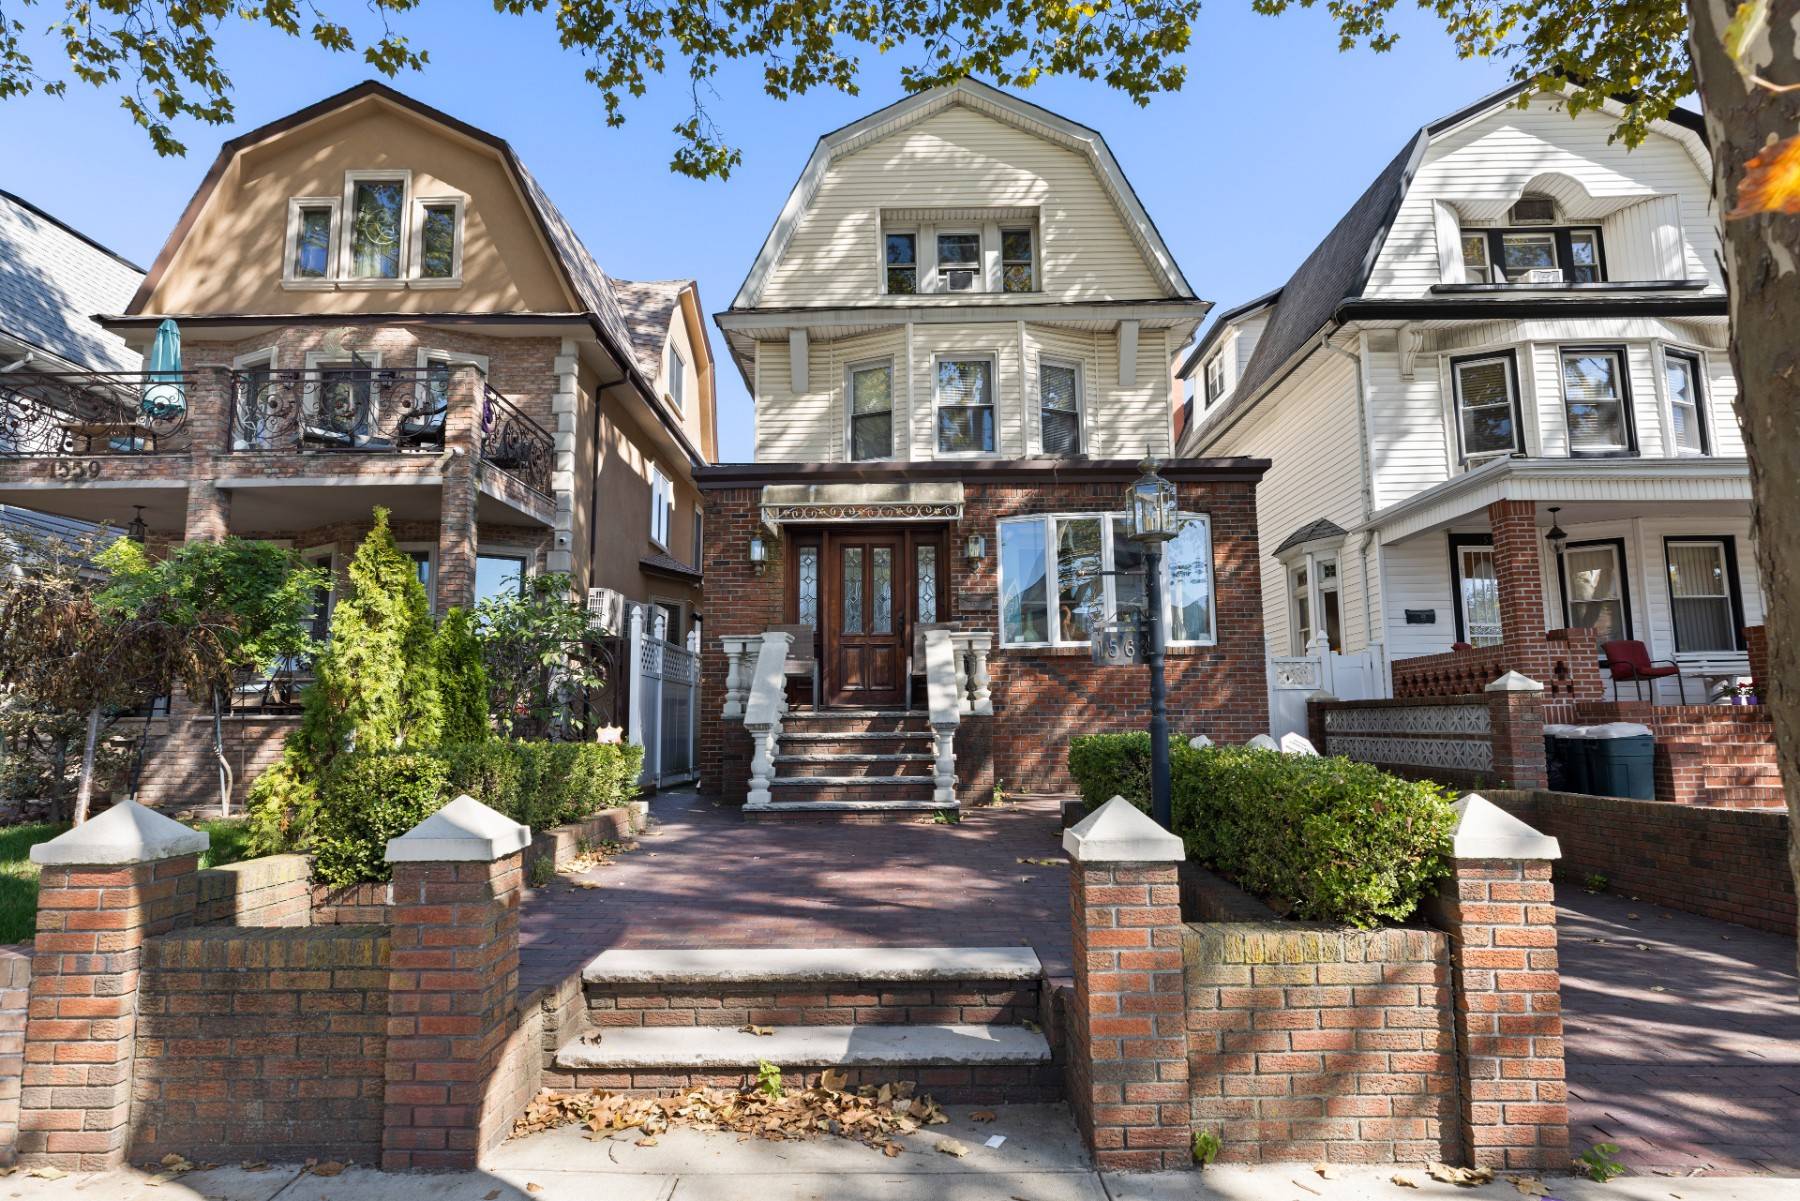 Welcome to this very well kept fully detached single family home located in Bensonhurst, Brooklyn !